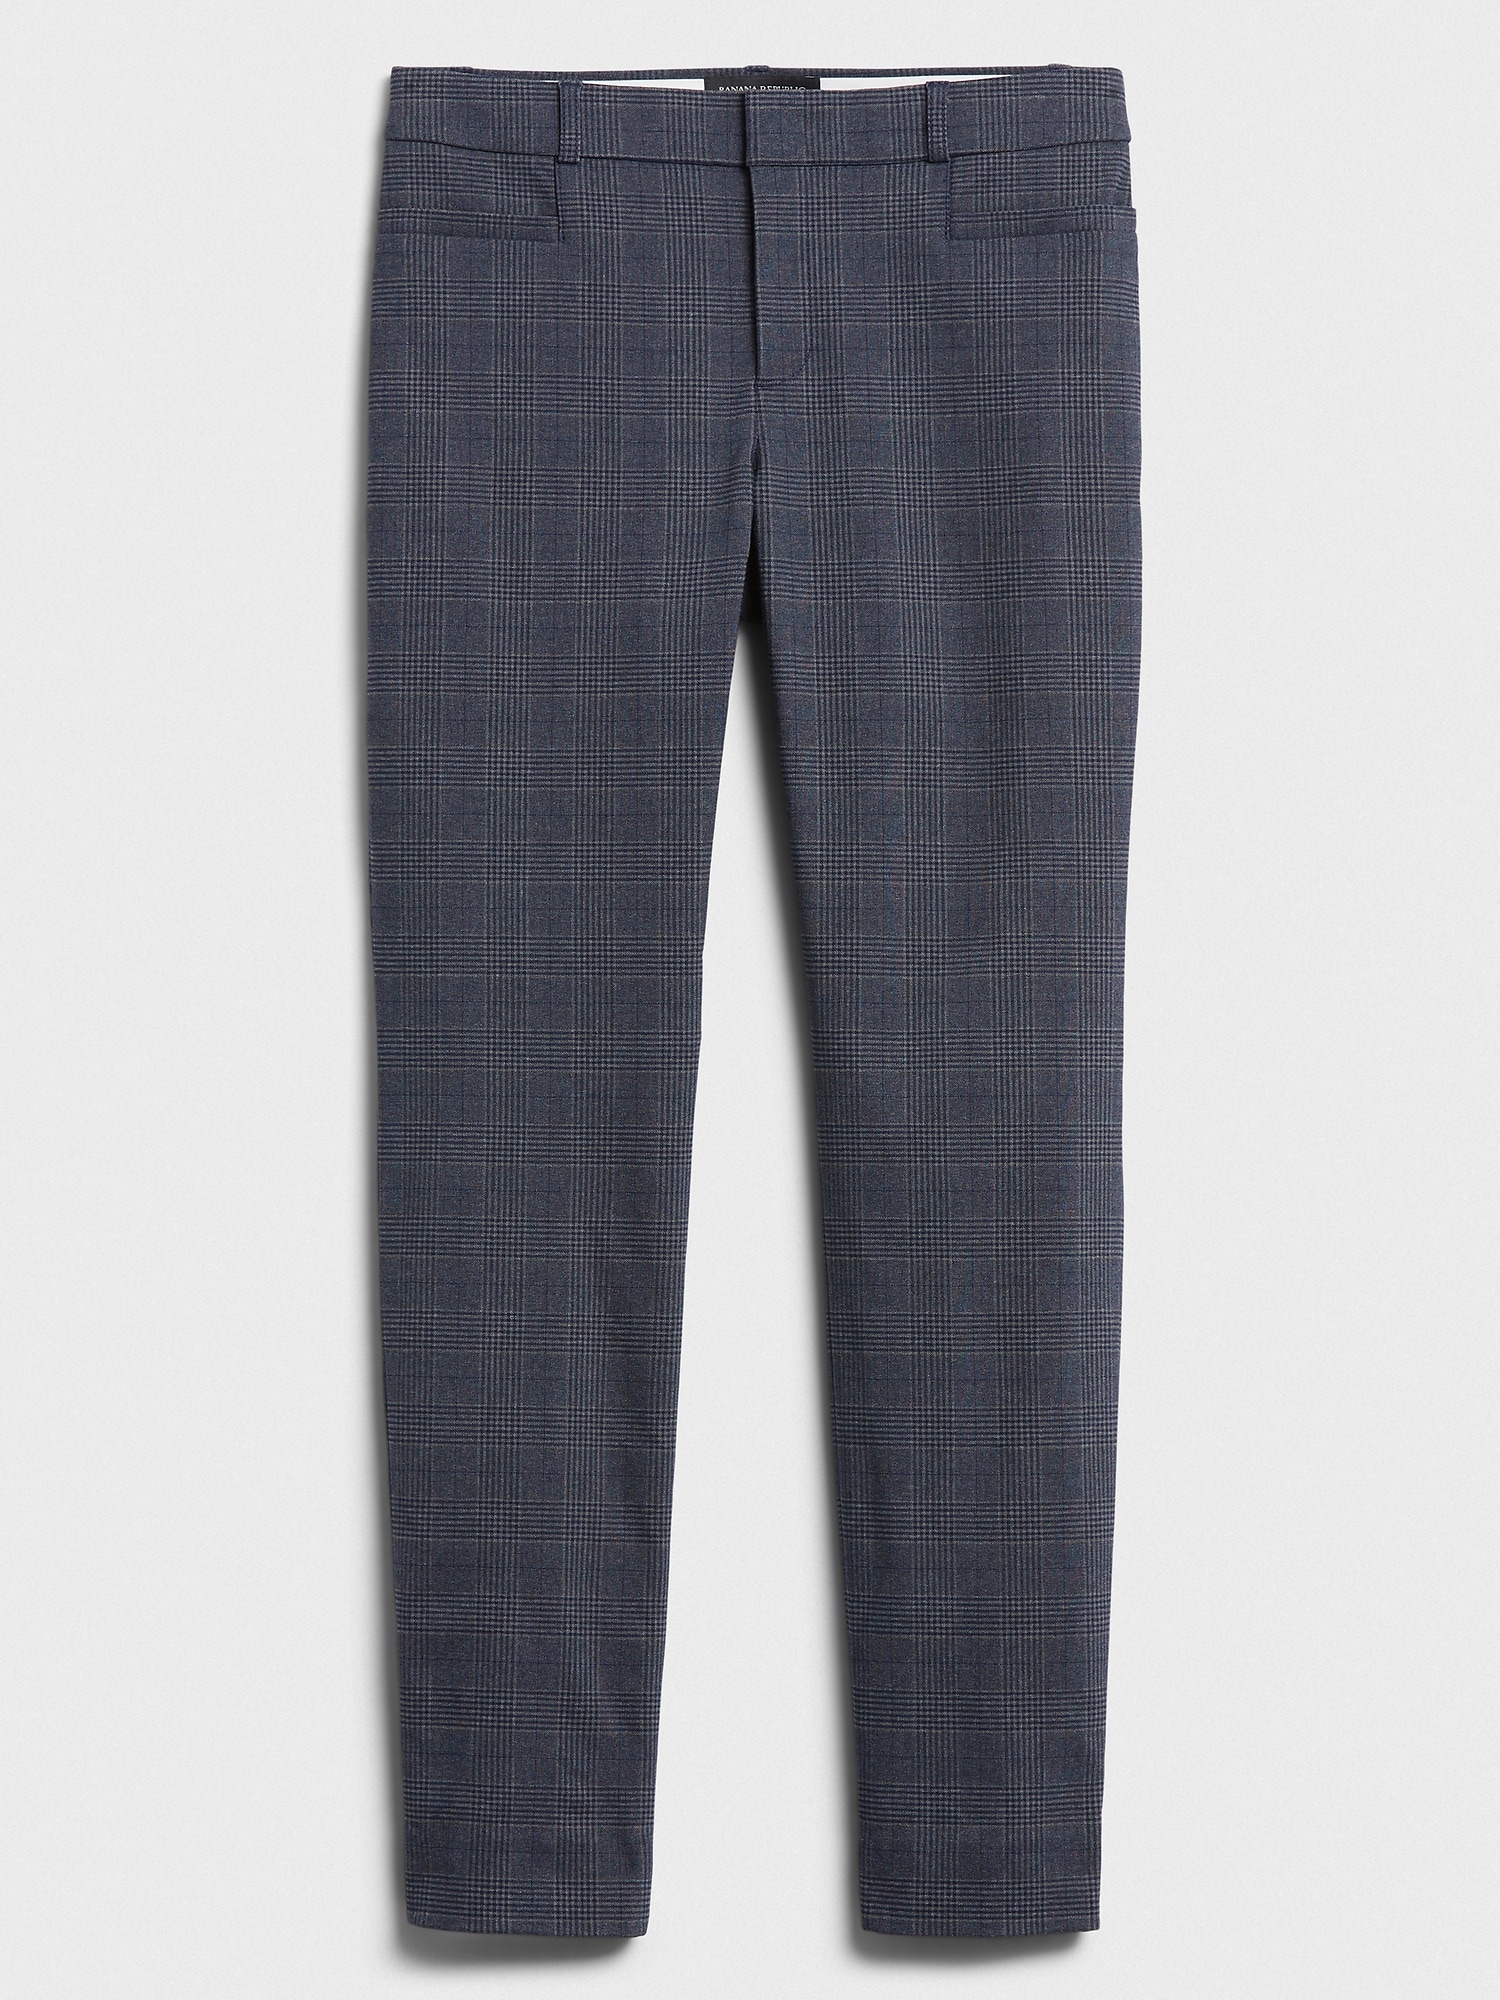 A New Day + Slim Fit Straight Leg Plaid Ankle Pants – A New Day™ Gray